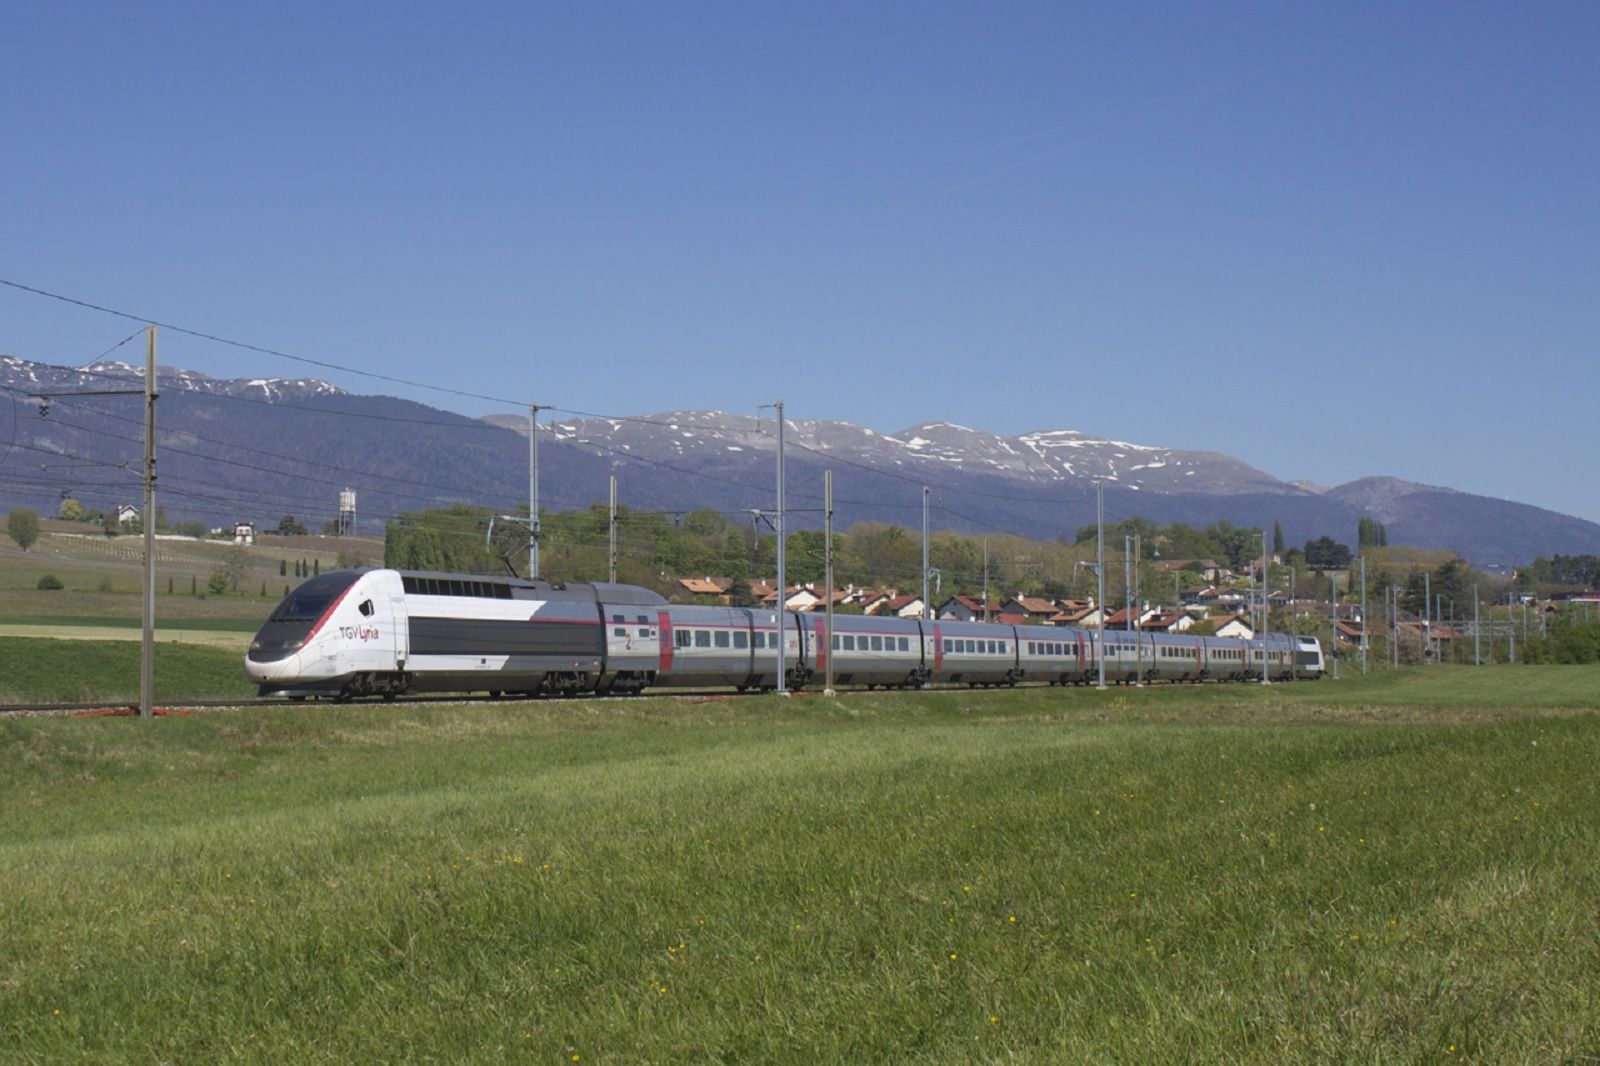 The Fastest Trains Around World Record Breaking Trains image 4